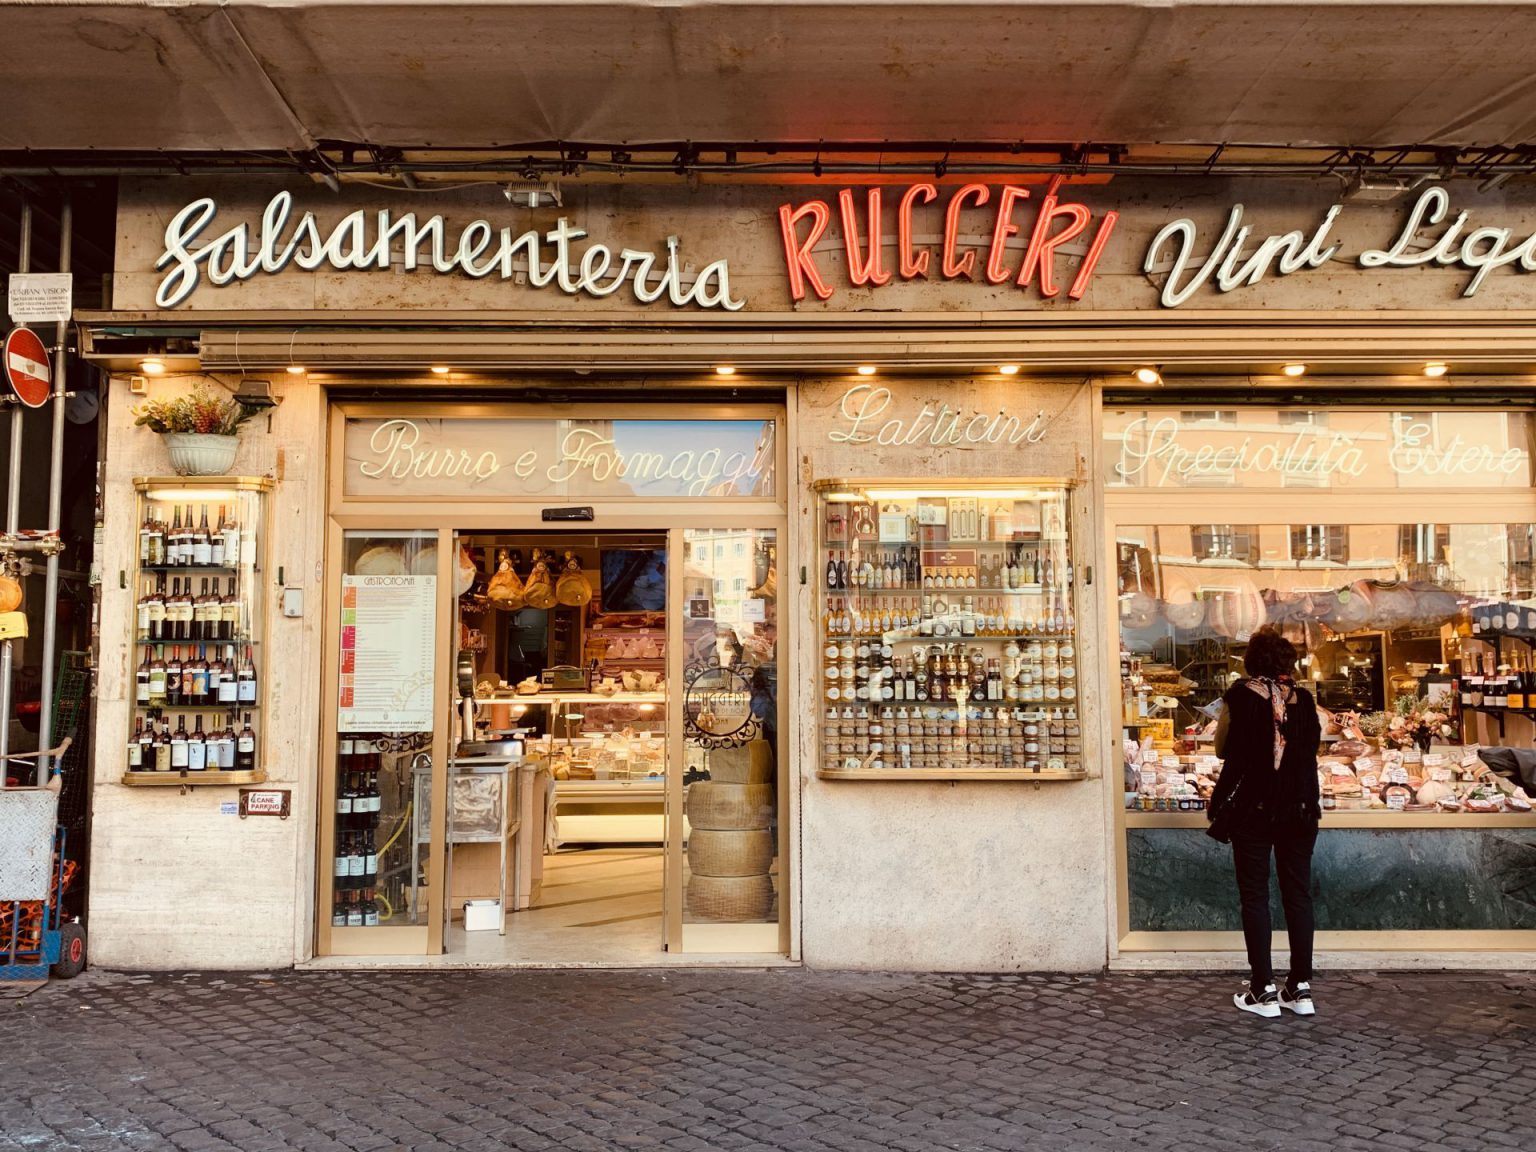 A culinary weekend in Rome